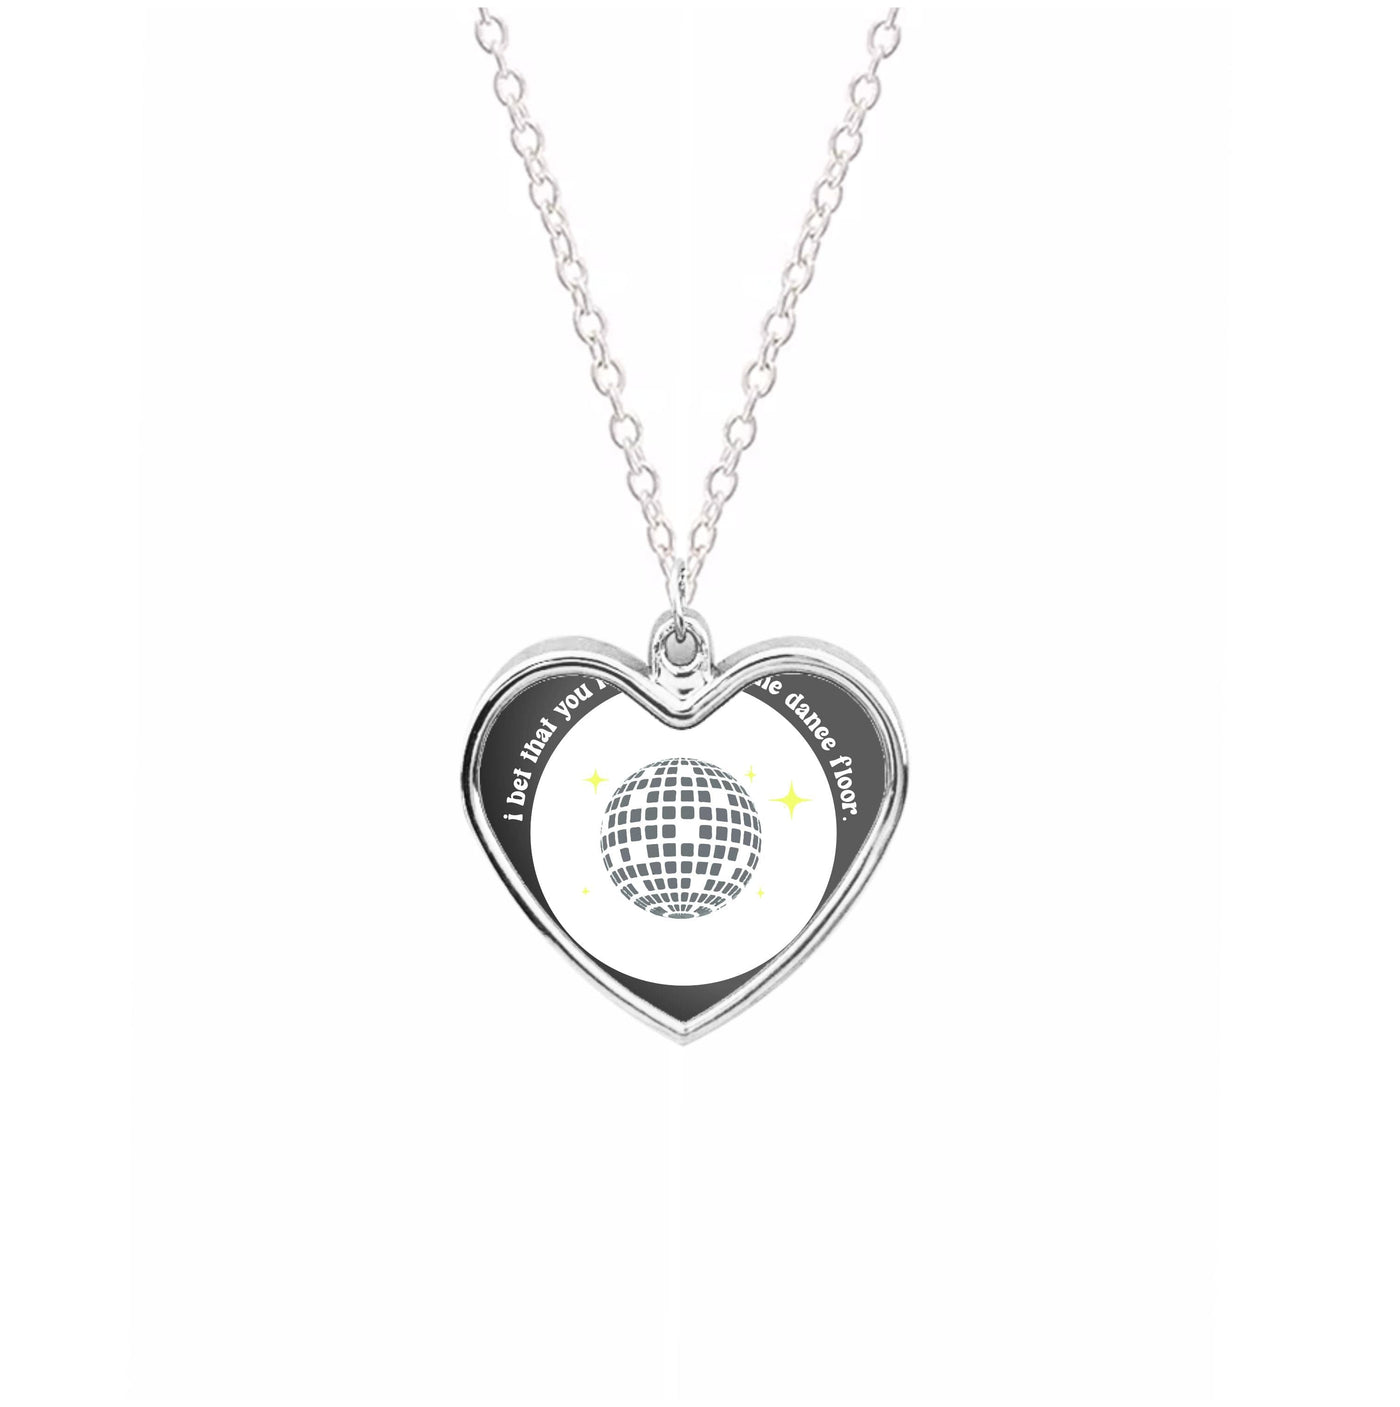 I bet that you look good on the dance floor - Arctic Monkeys Necklace